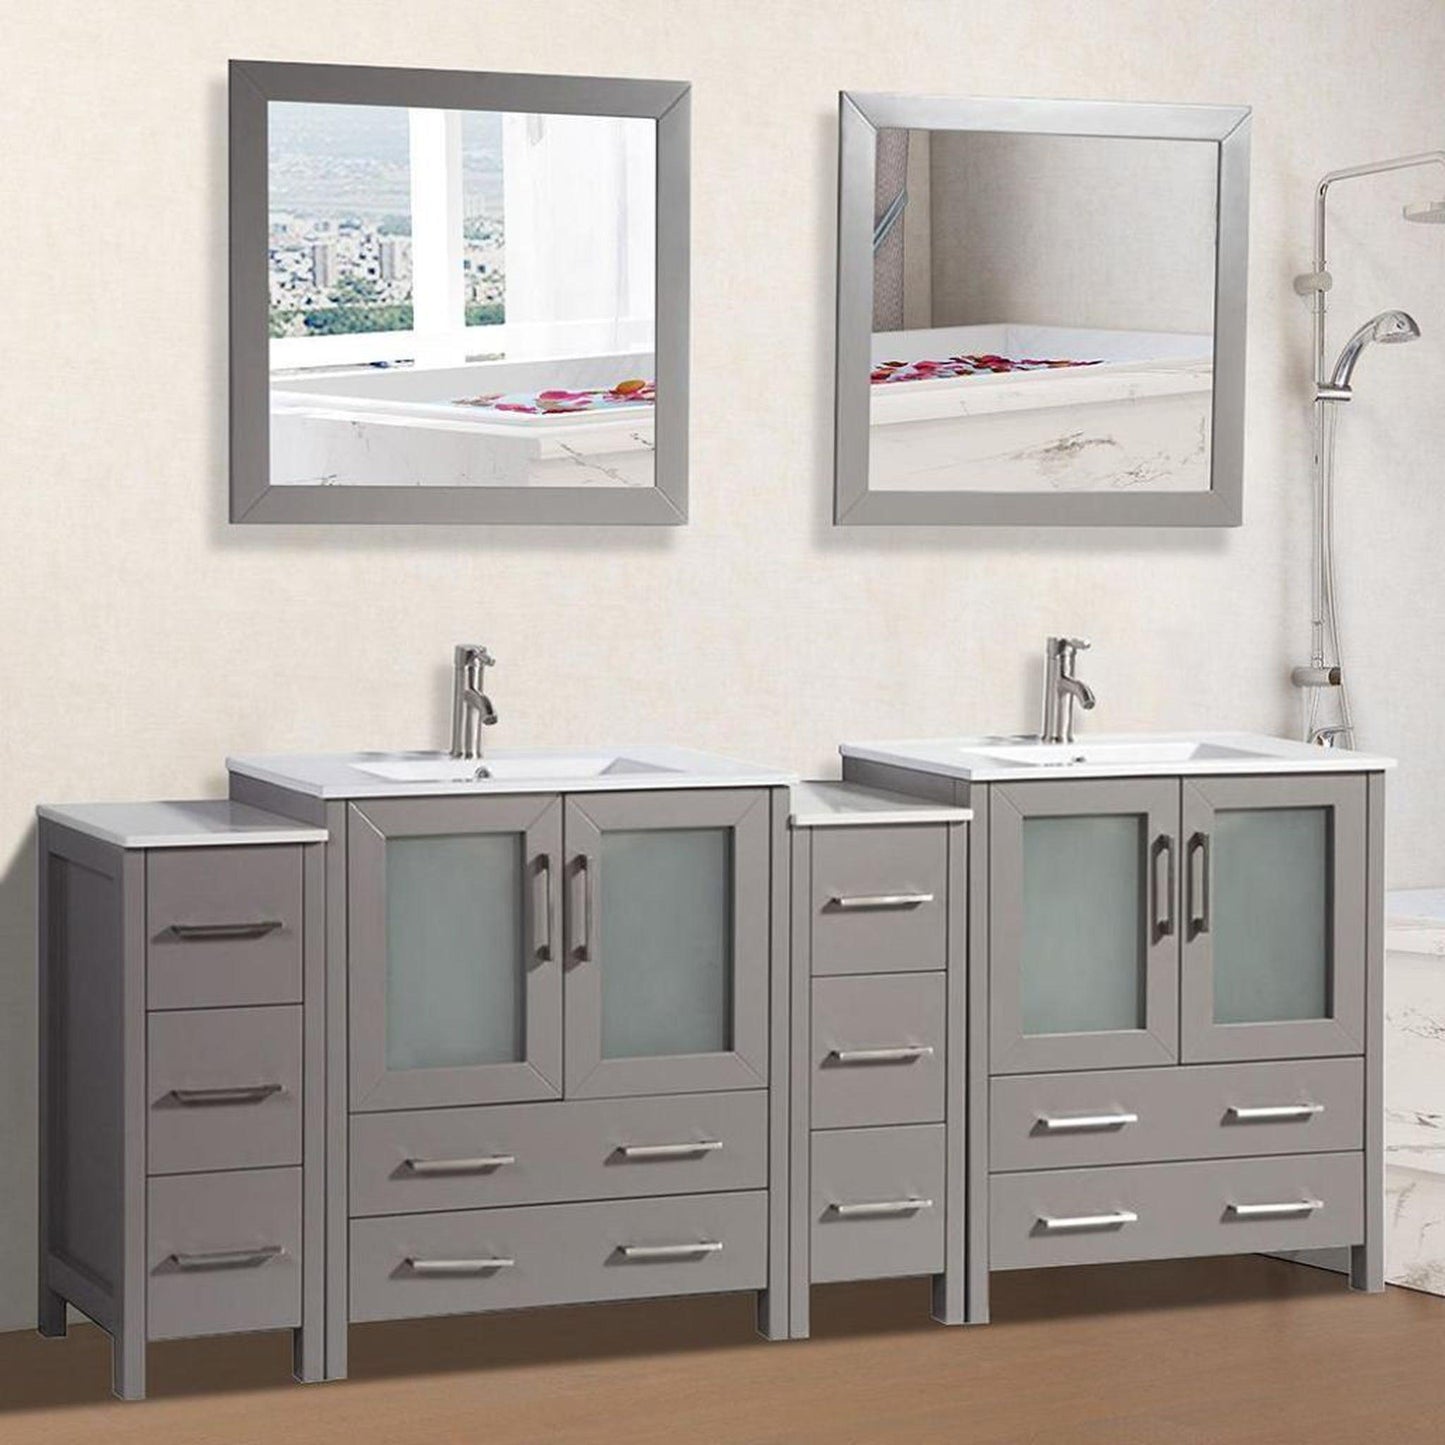 Vanity Art VA30 84" Double Gray Freestanding Modern Bathroom Vanity Set With Integrated Ceramic Sink, Compact 2 Shelves, 10 Dovetail Drawers Cabinet And 2 Mirrors